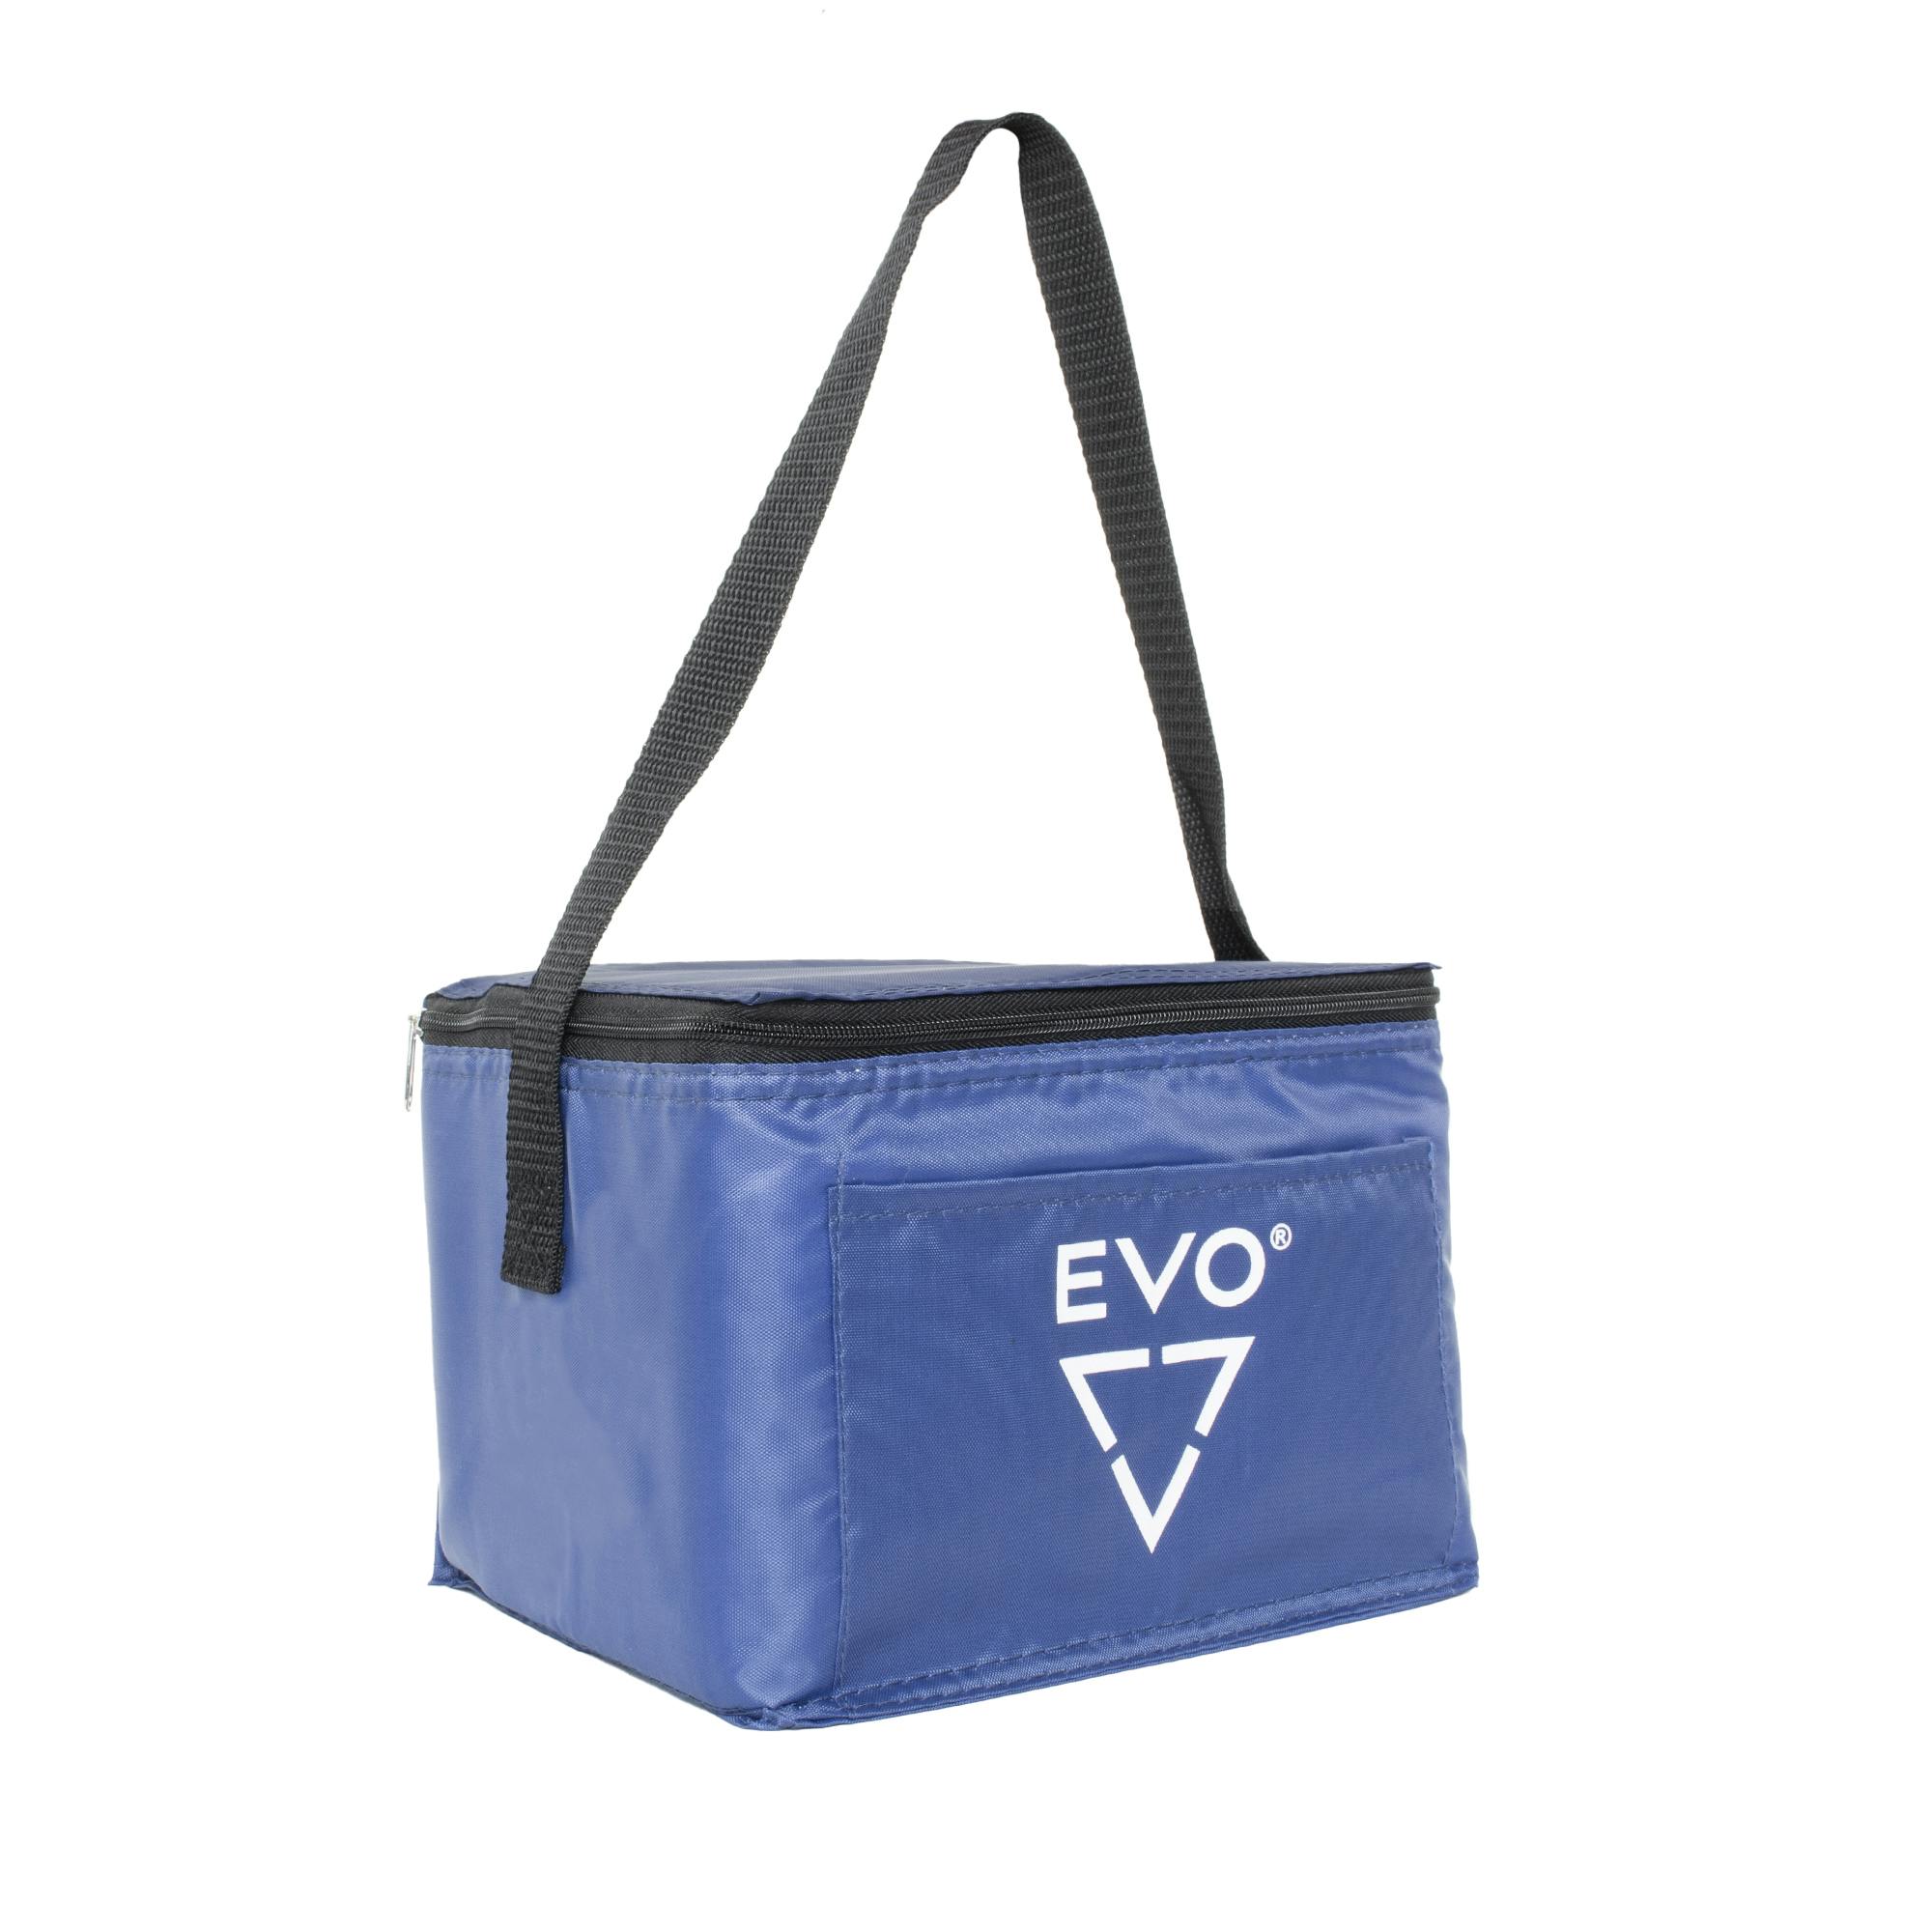 EVO 6-Pack Cooler 3/4 view with strap up